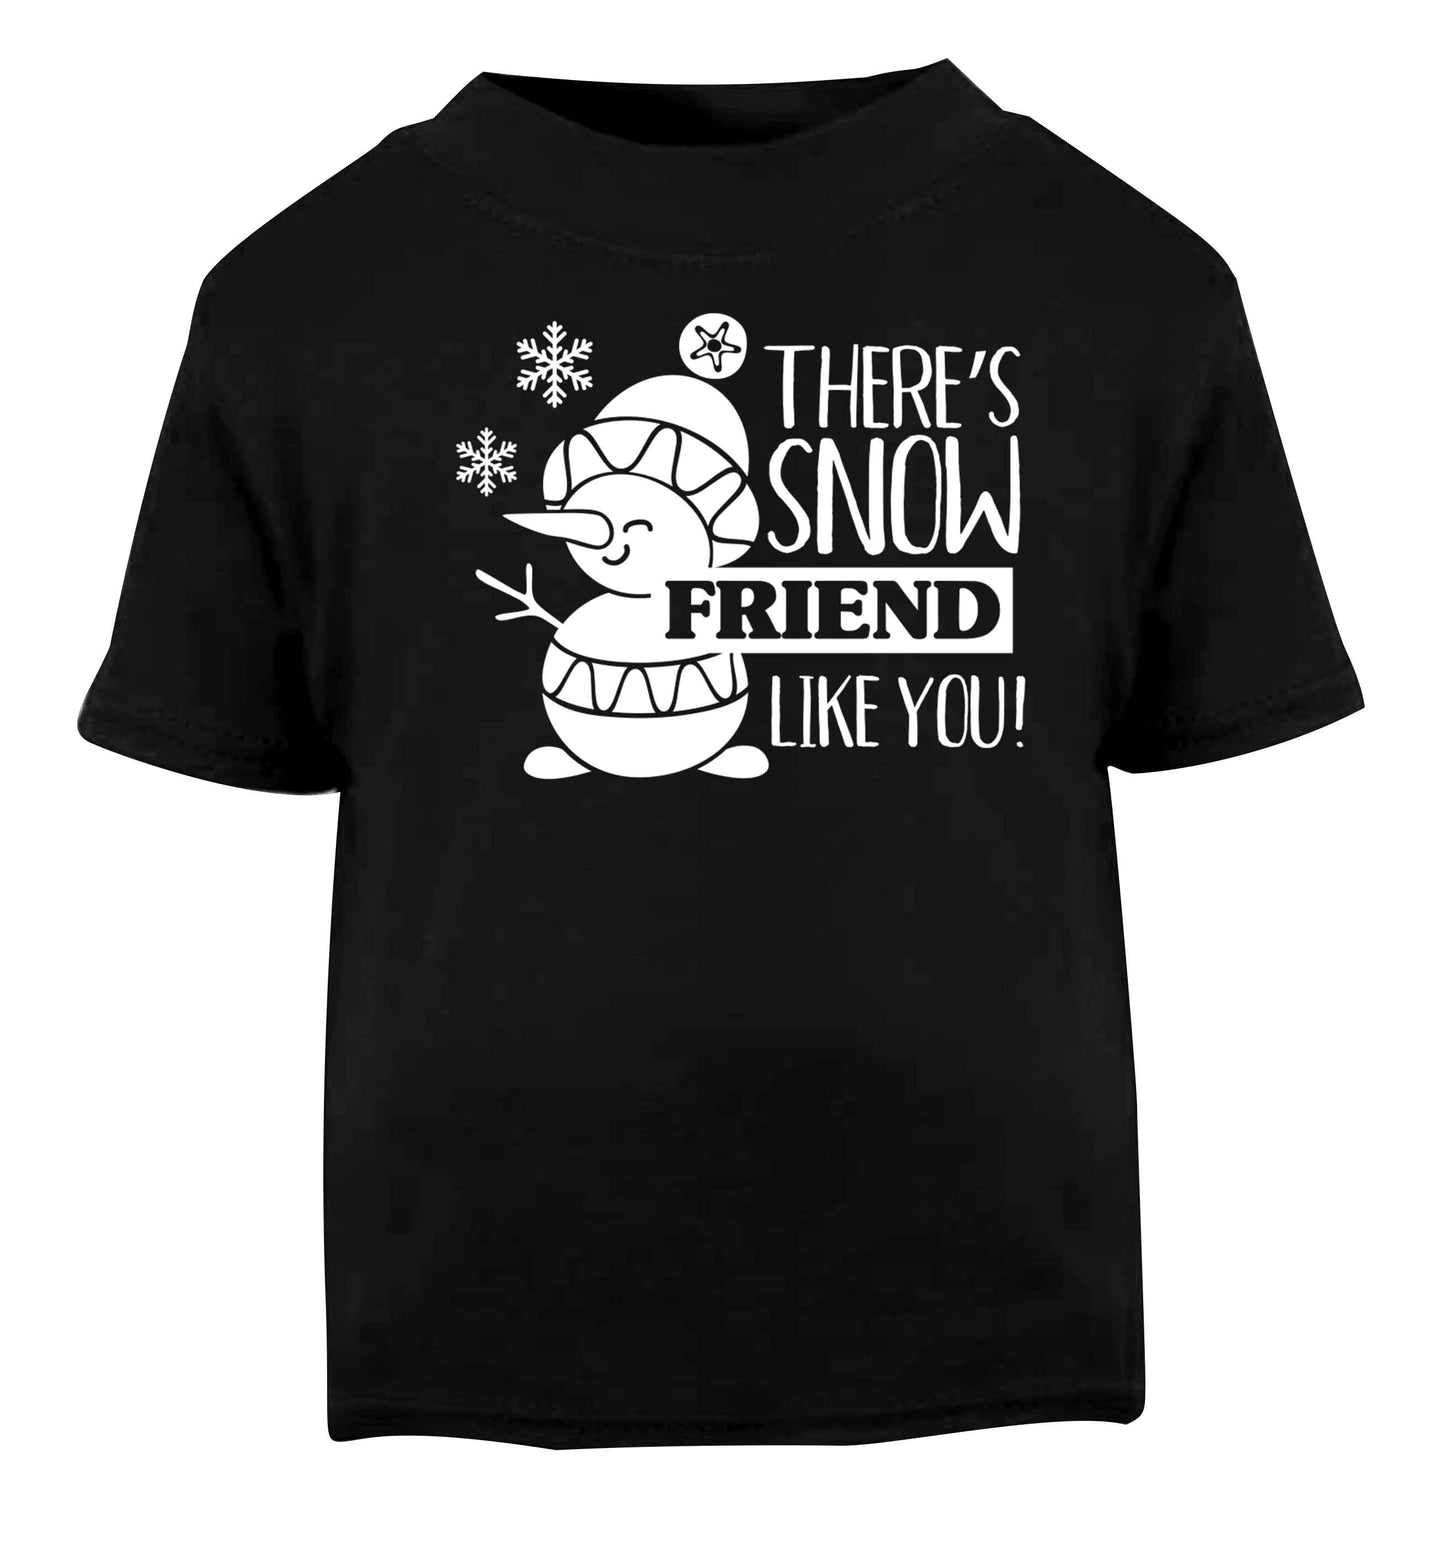 There's snow friend like you Black baby toddler Tshirt 2 years